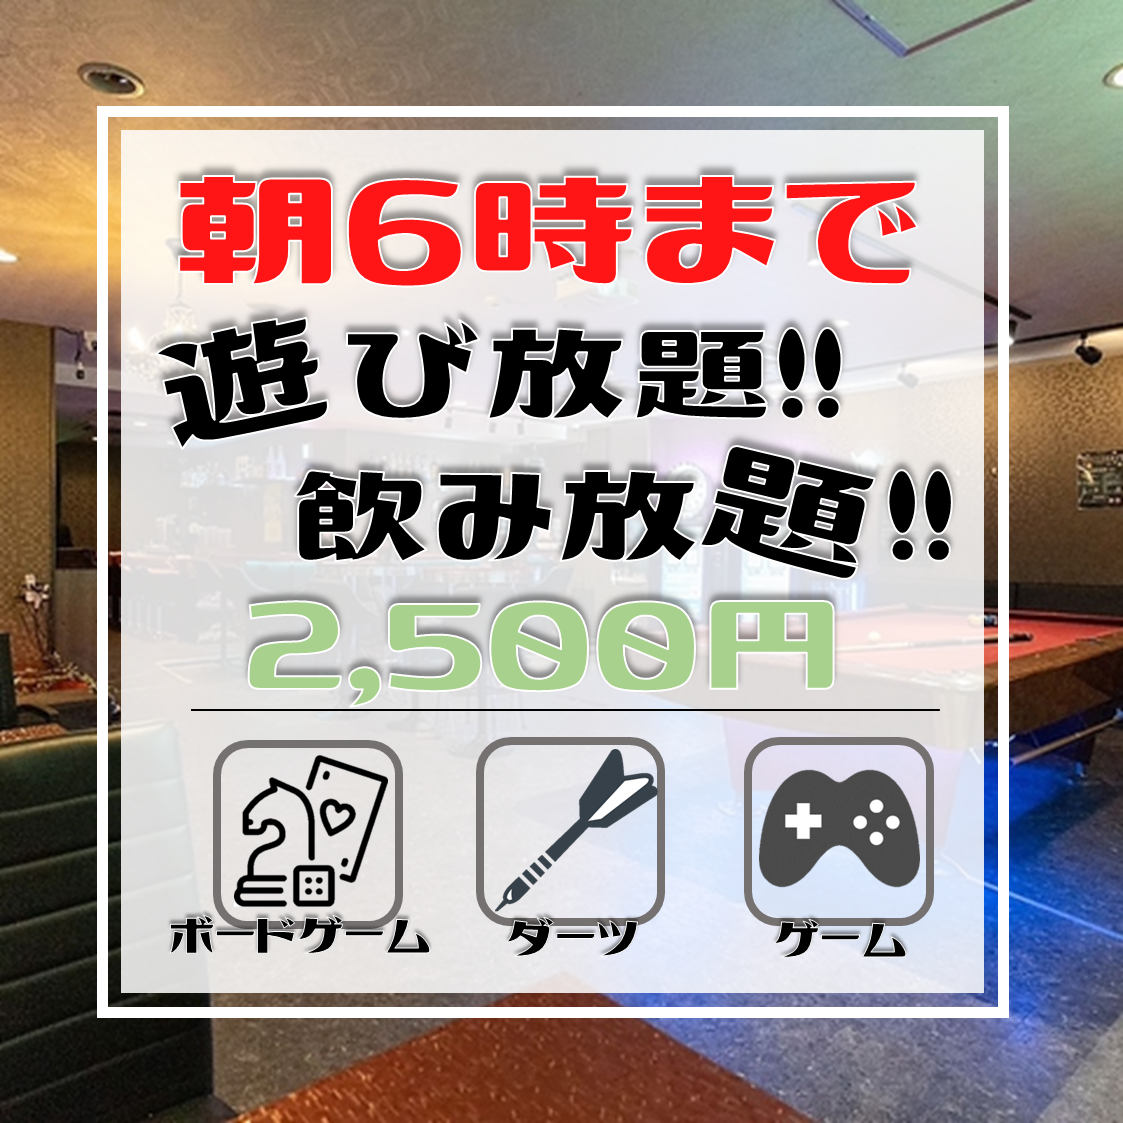 Big event for a limited time★All-you-can-play & all-you-can-drink until morning 5,000 yen⇒2,500 yen★